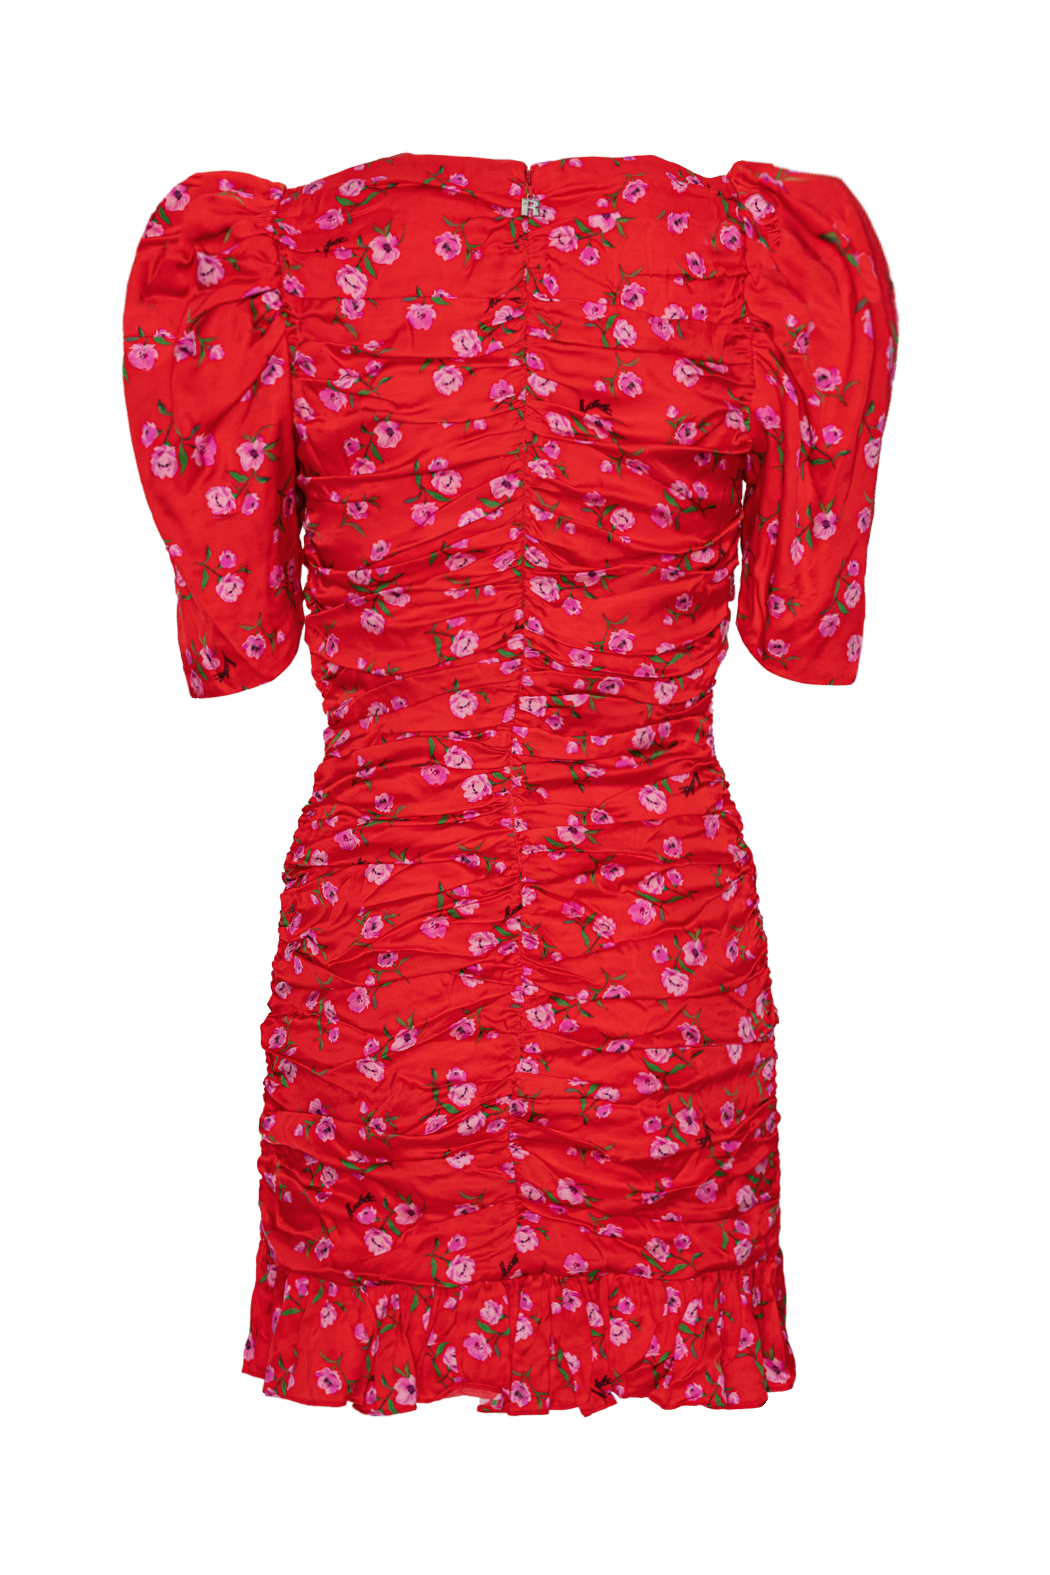 Printed Mini Ruffle Dress - Wildeve Cluster + High
Risk Red Comb